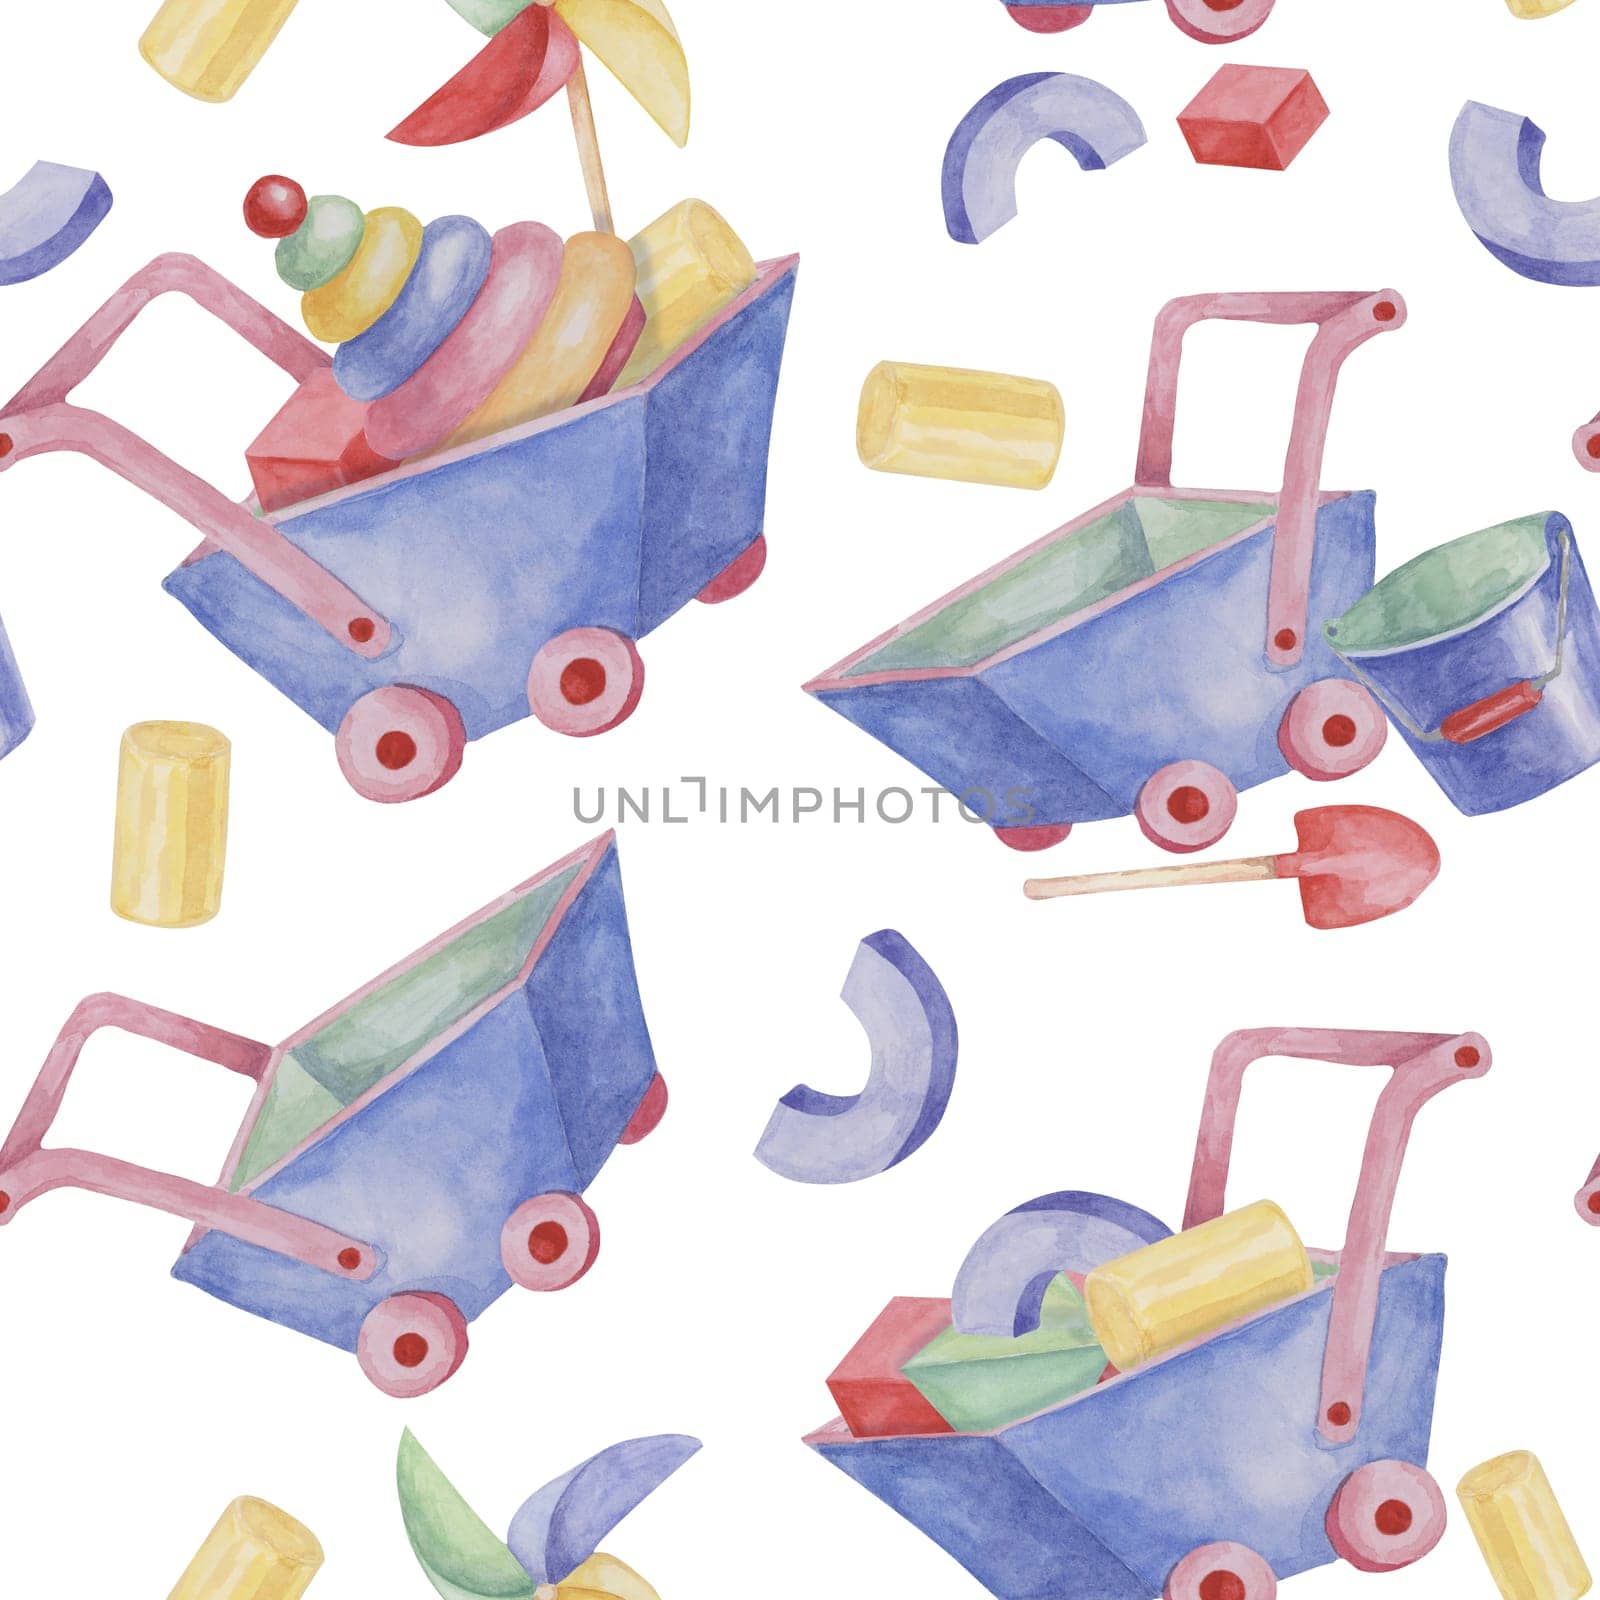 Baby seamless pattern with wheelbarrow, bucket, shovel, stack rings, pinwheel in watercolor. Retro toy ornament Hand drawn textile print for kids, children's wallpaper, wrapping, present, scrapbooking